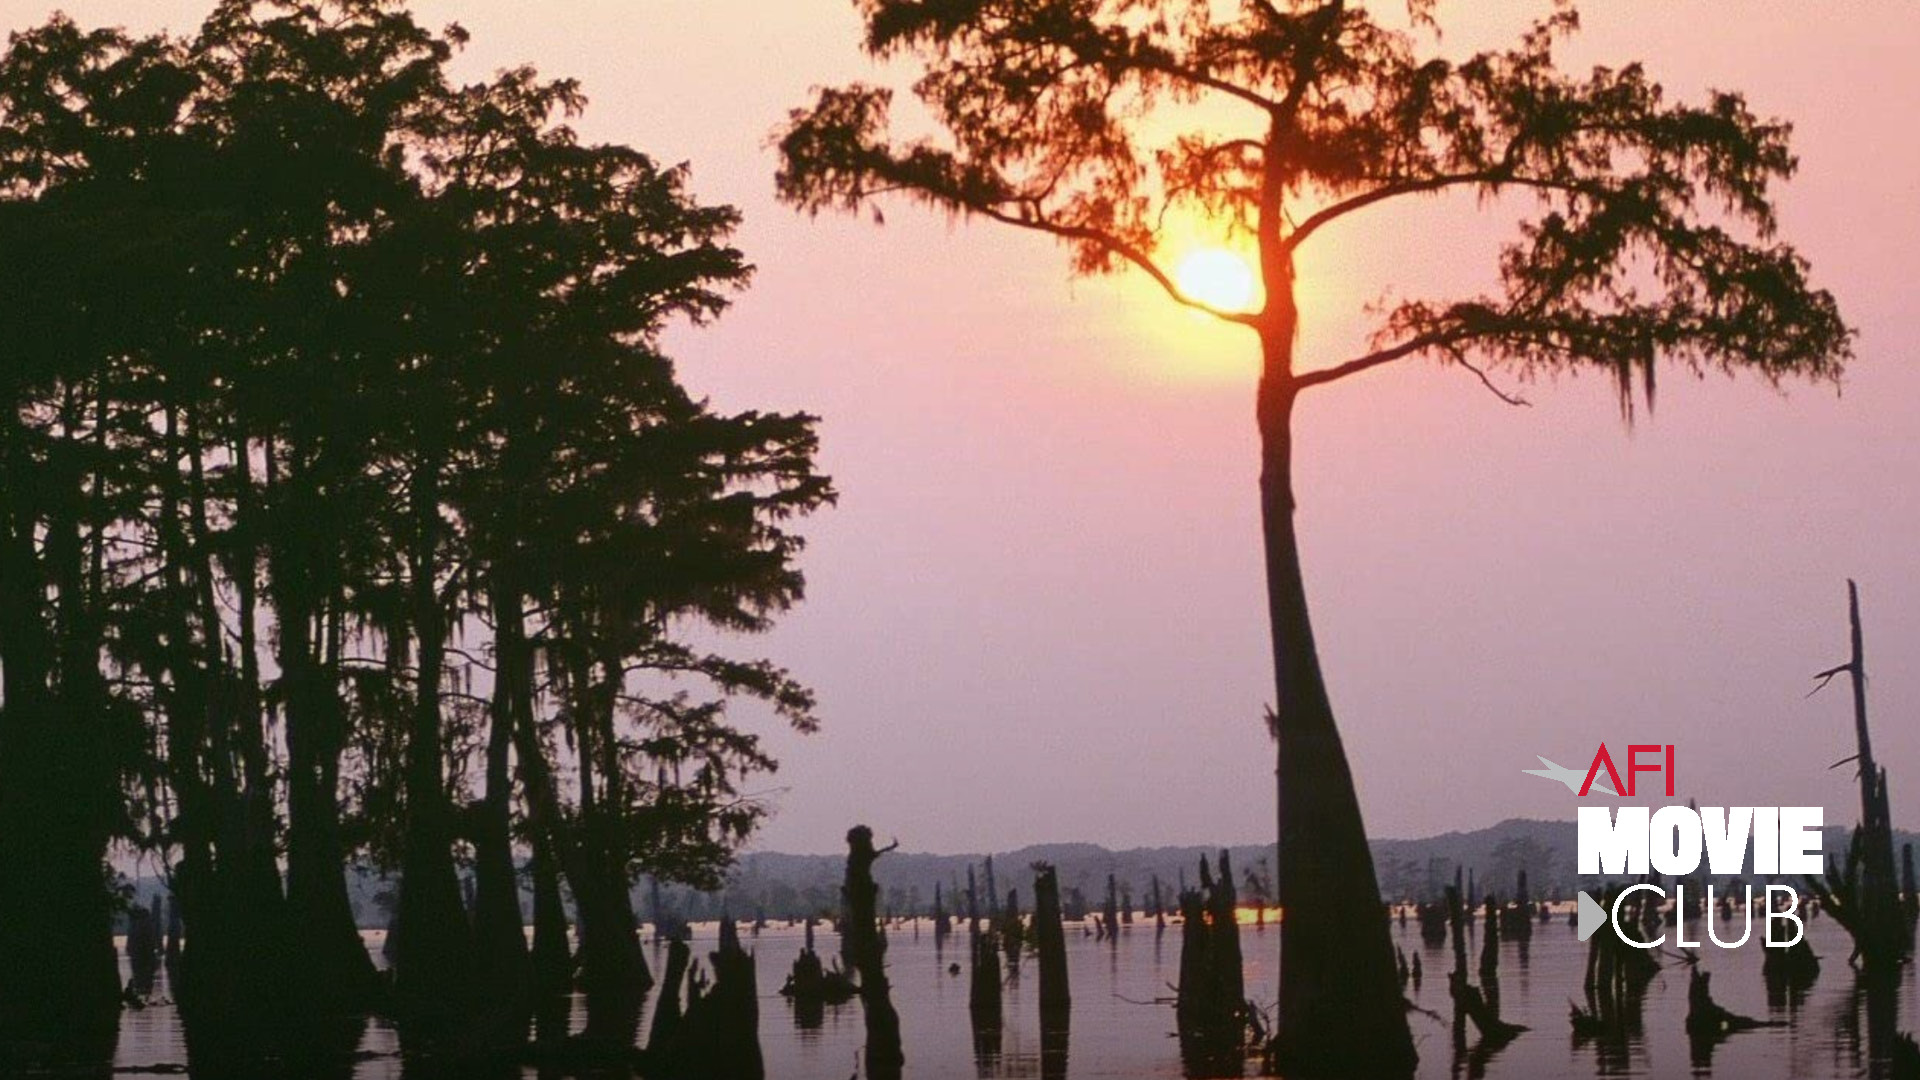 In the right corner, there is an AFI Movie Club logo. The film still is from EVE'S BAYOU: On the left side of the image are a cluster of the trees. Just off-center to the right, one majestic tall tree grows out of the bayou. A deep yellow sun peeks out through its branches, standing out against hazy pink sky.